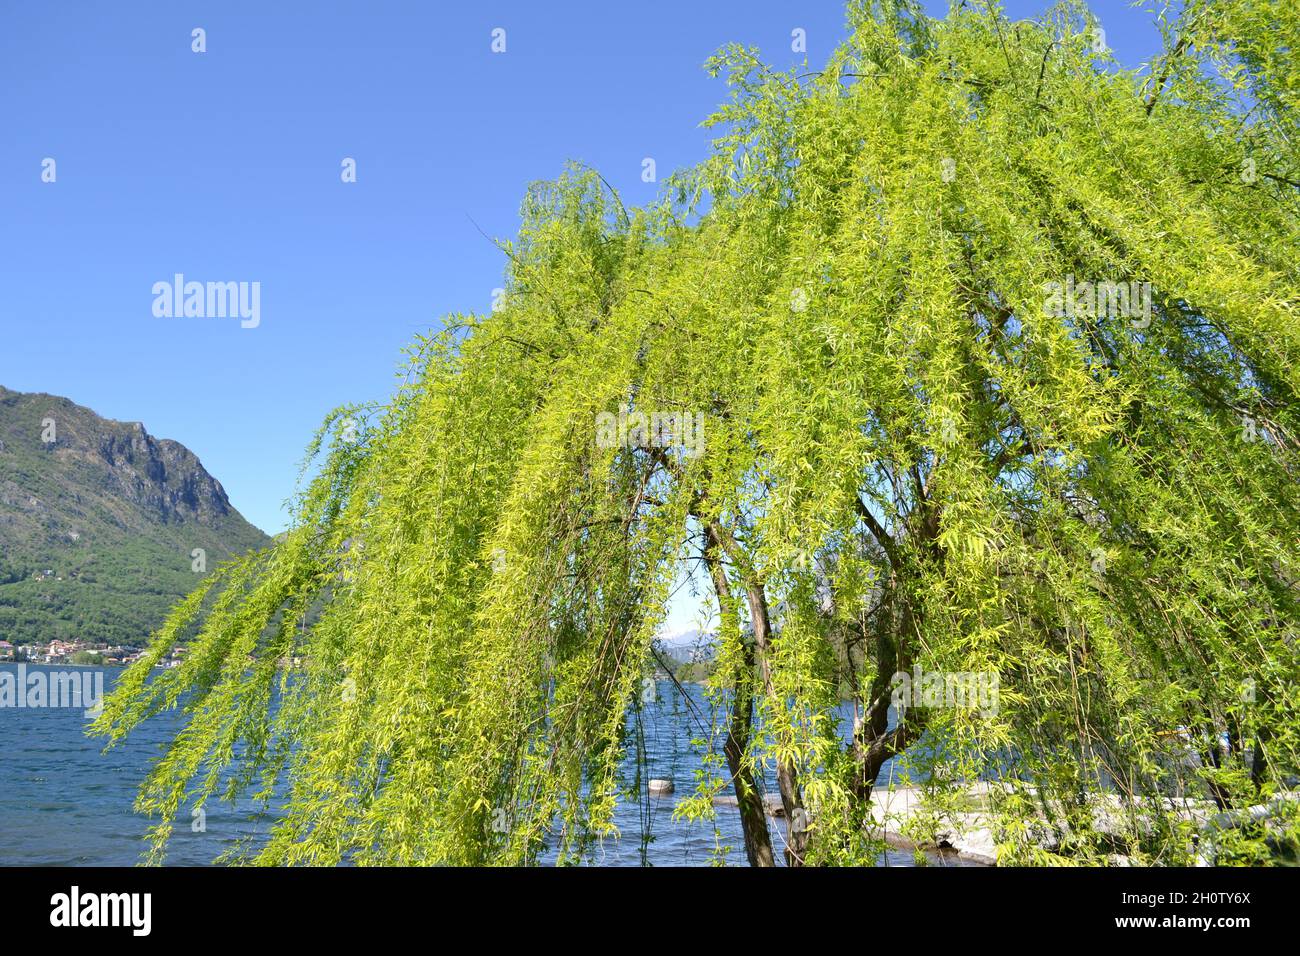 Beautiful landscape of a bright green weeping willow treetop bent by the wind in the lake in spring sunny day. Stock Photo